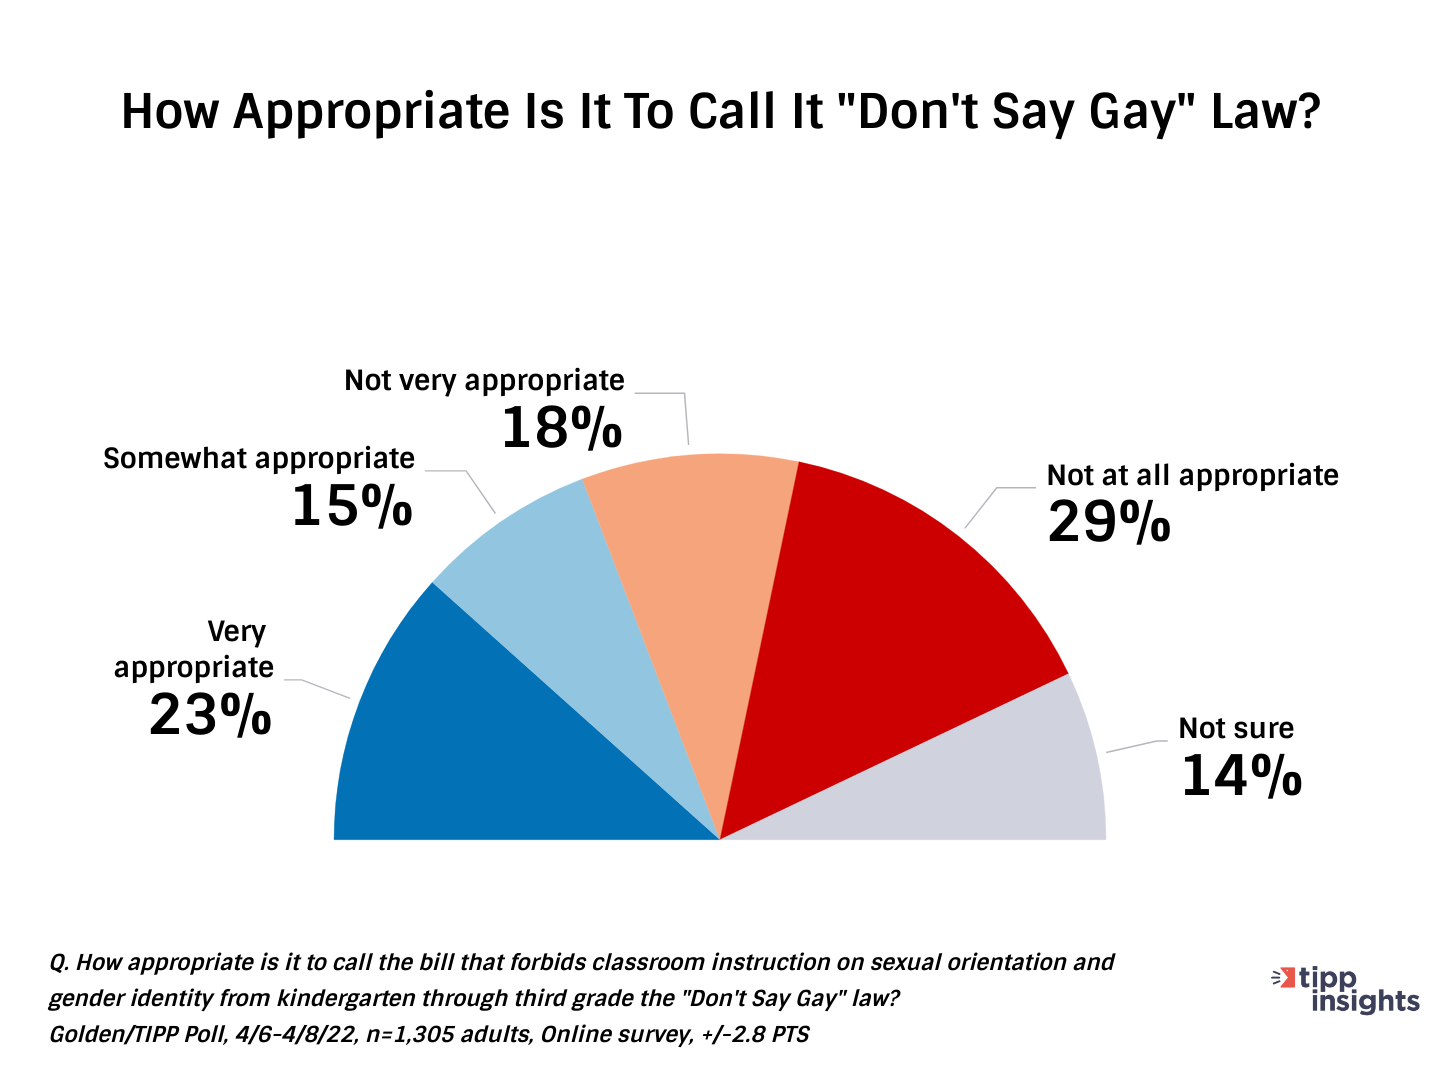 Golden/TIPP Poll Results: Do americans think it is appropriate to call Flordia's Parental Rights in Education "Don't say gay"